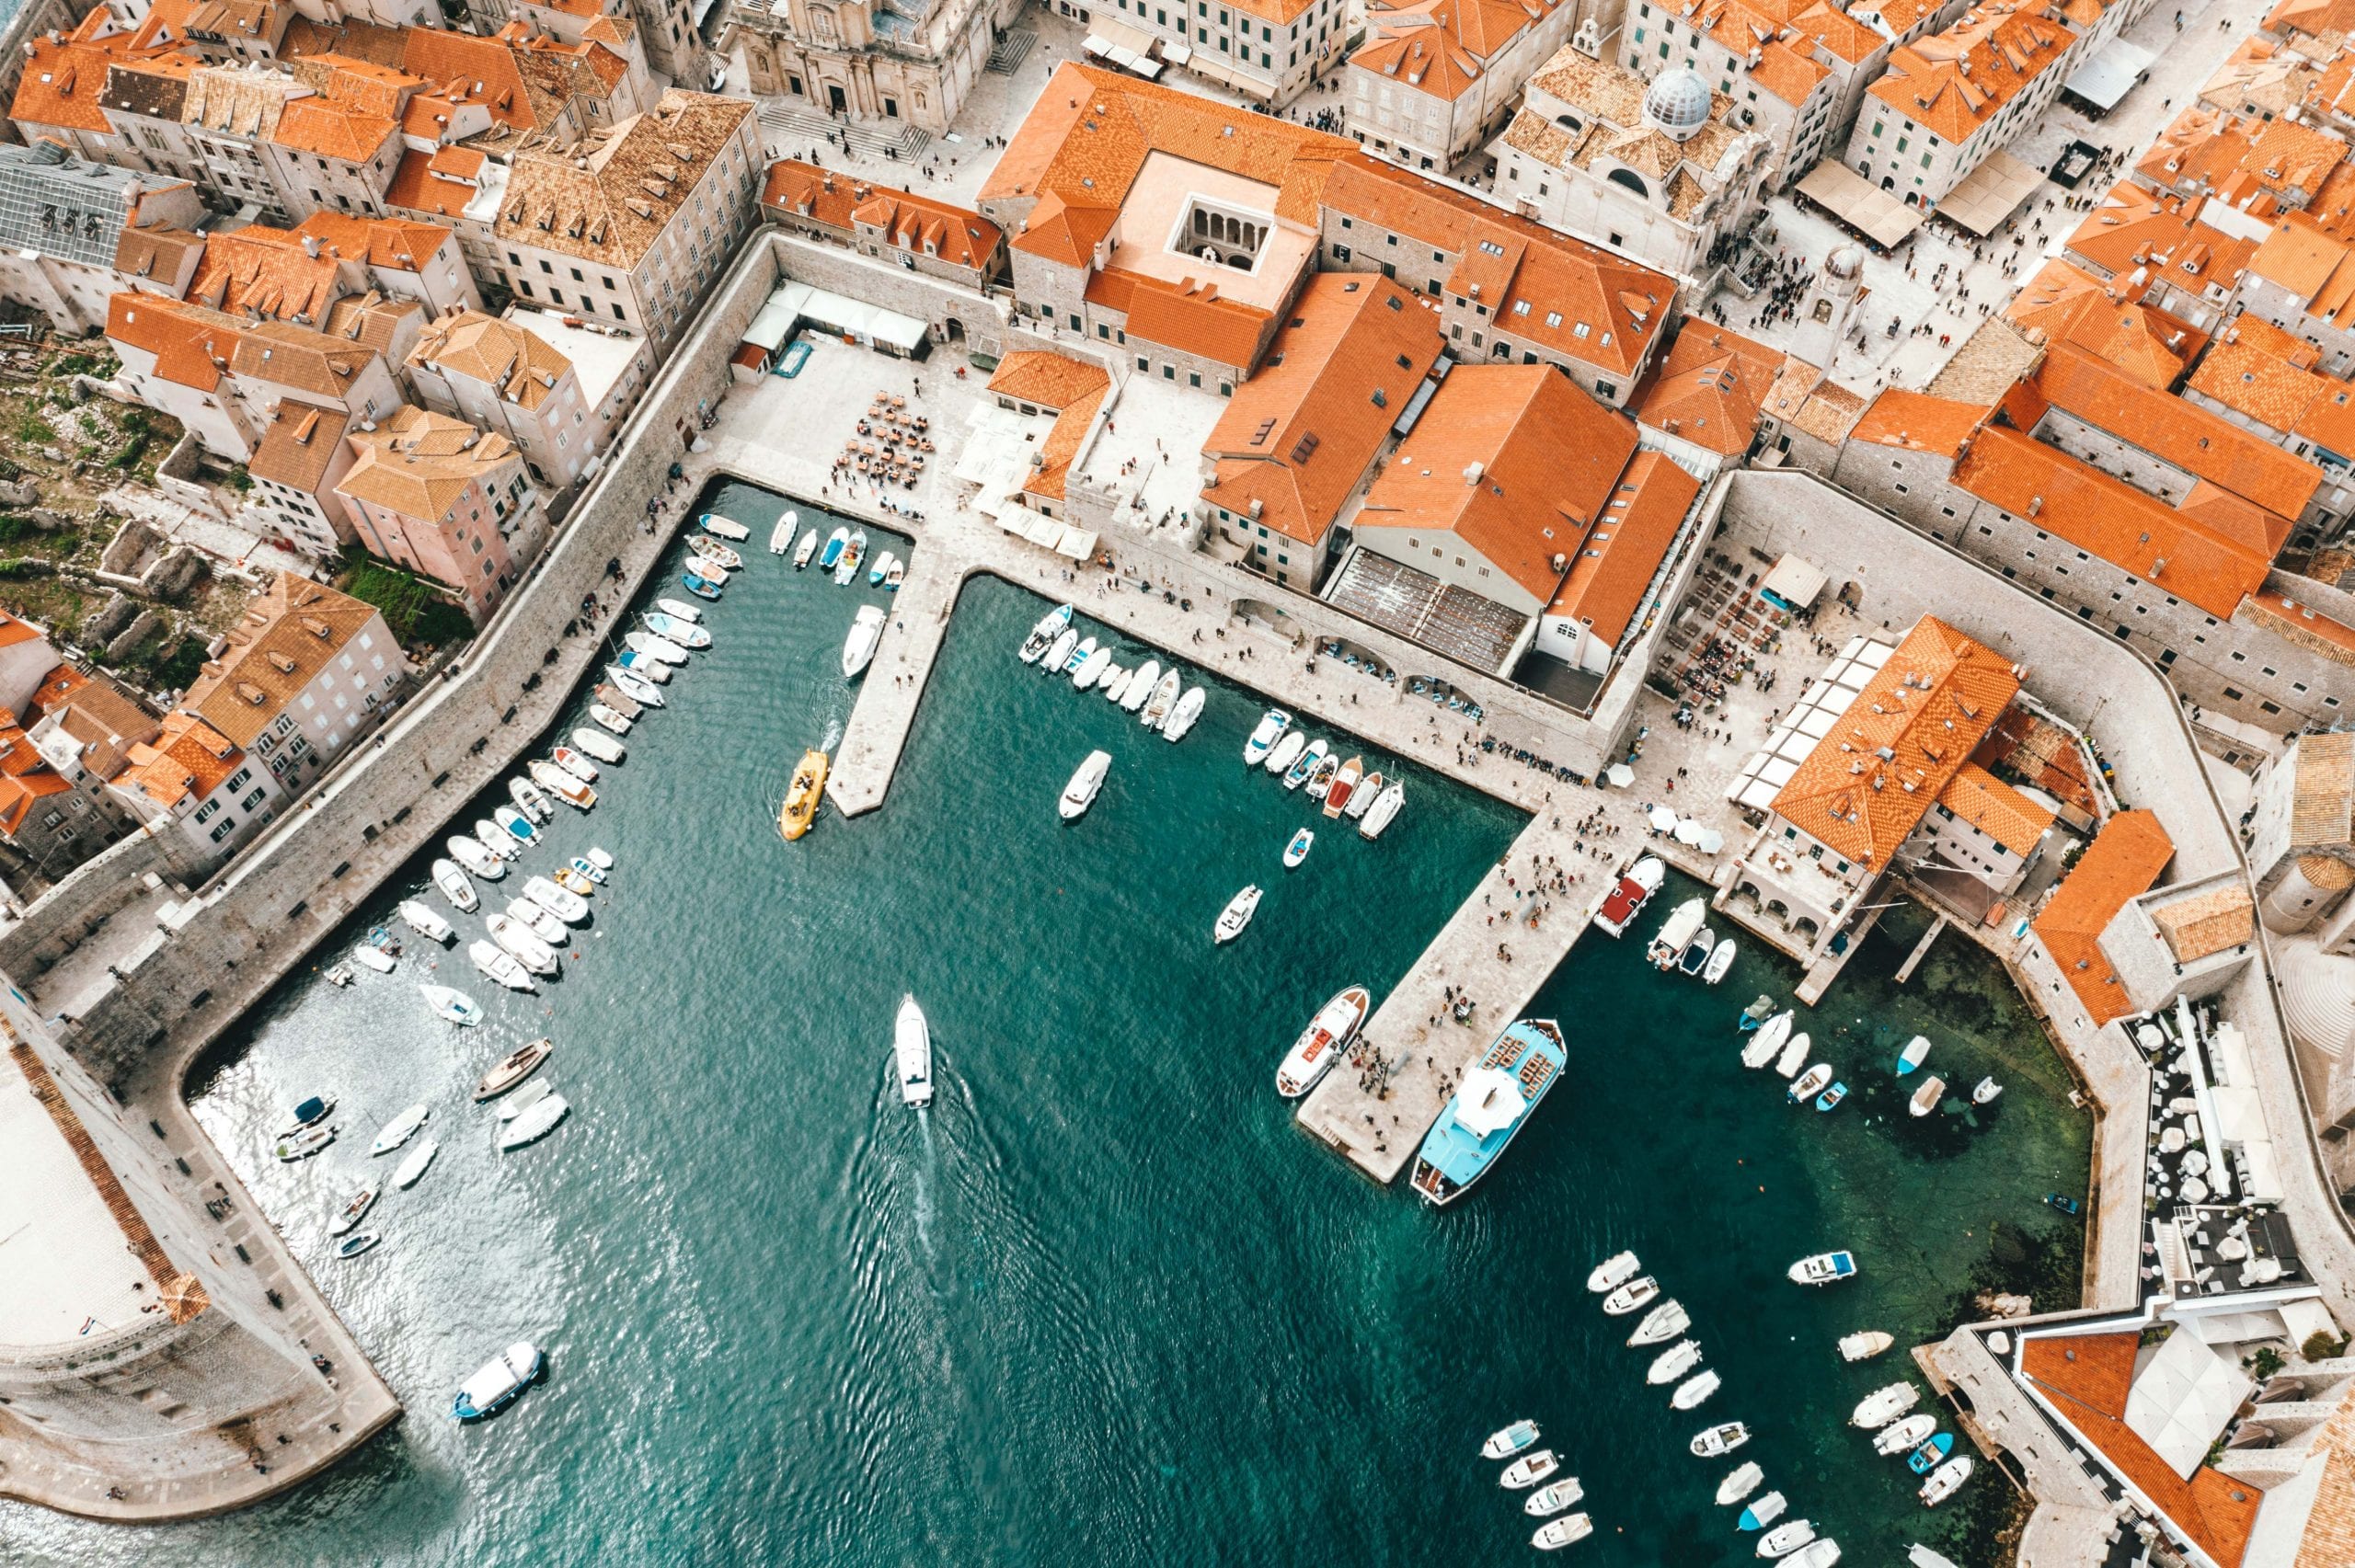 A Guide To The Game Of Thrones Locations In Dubrovnik